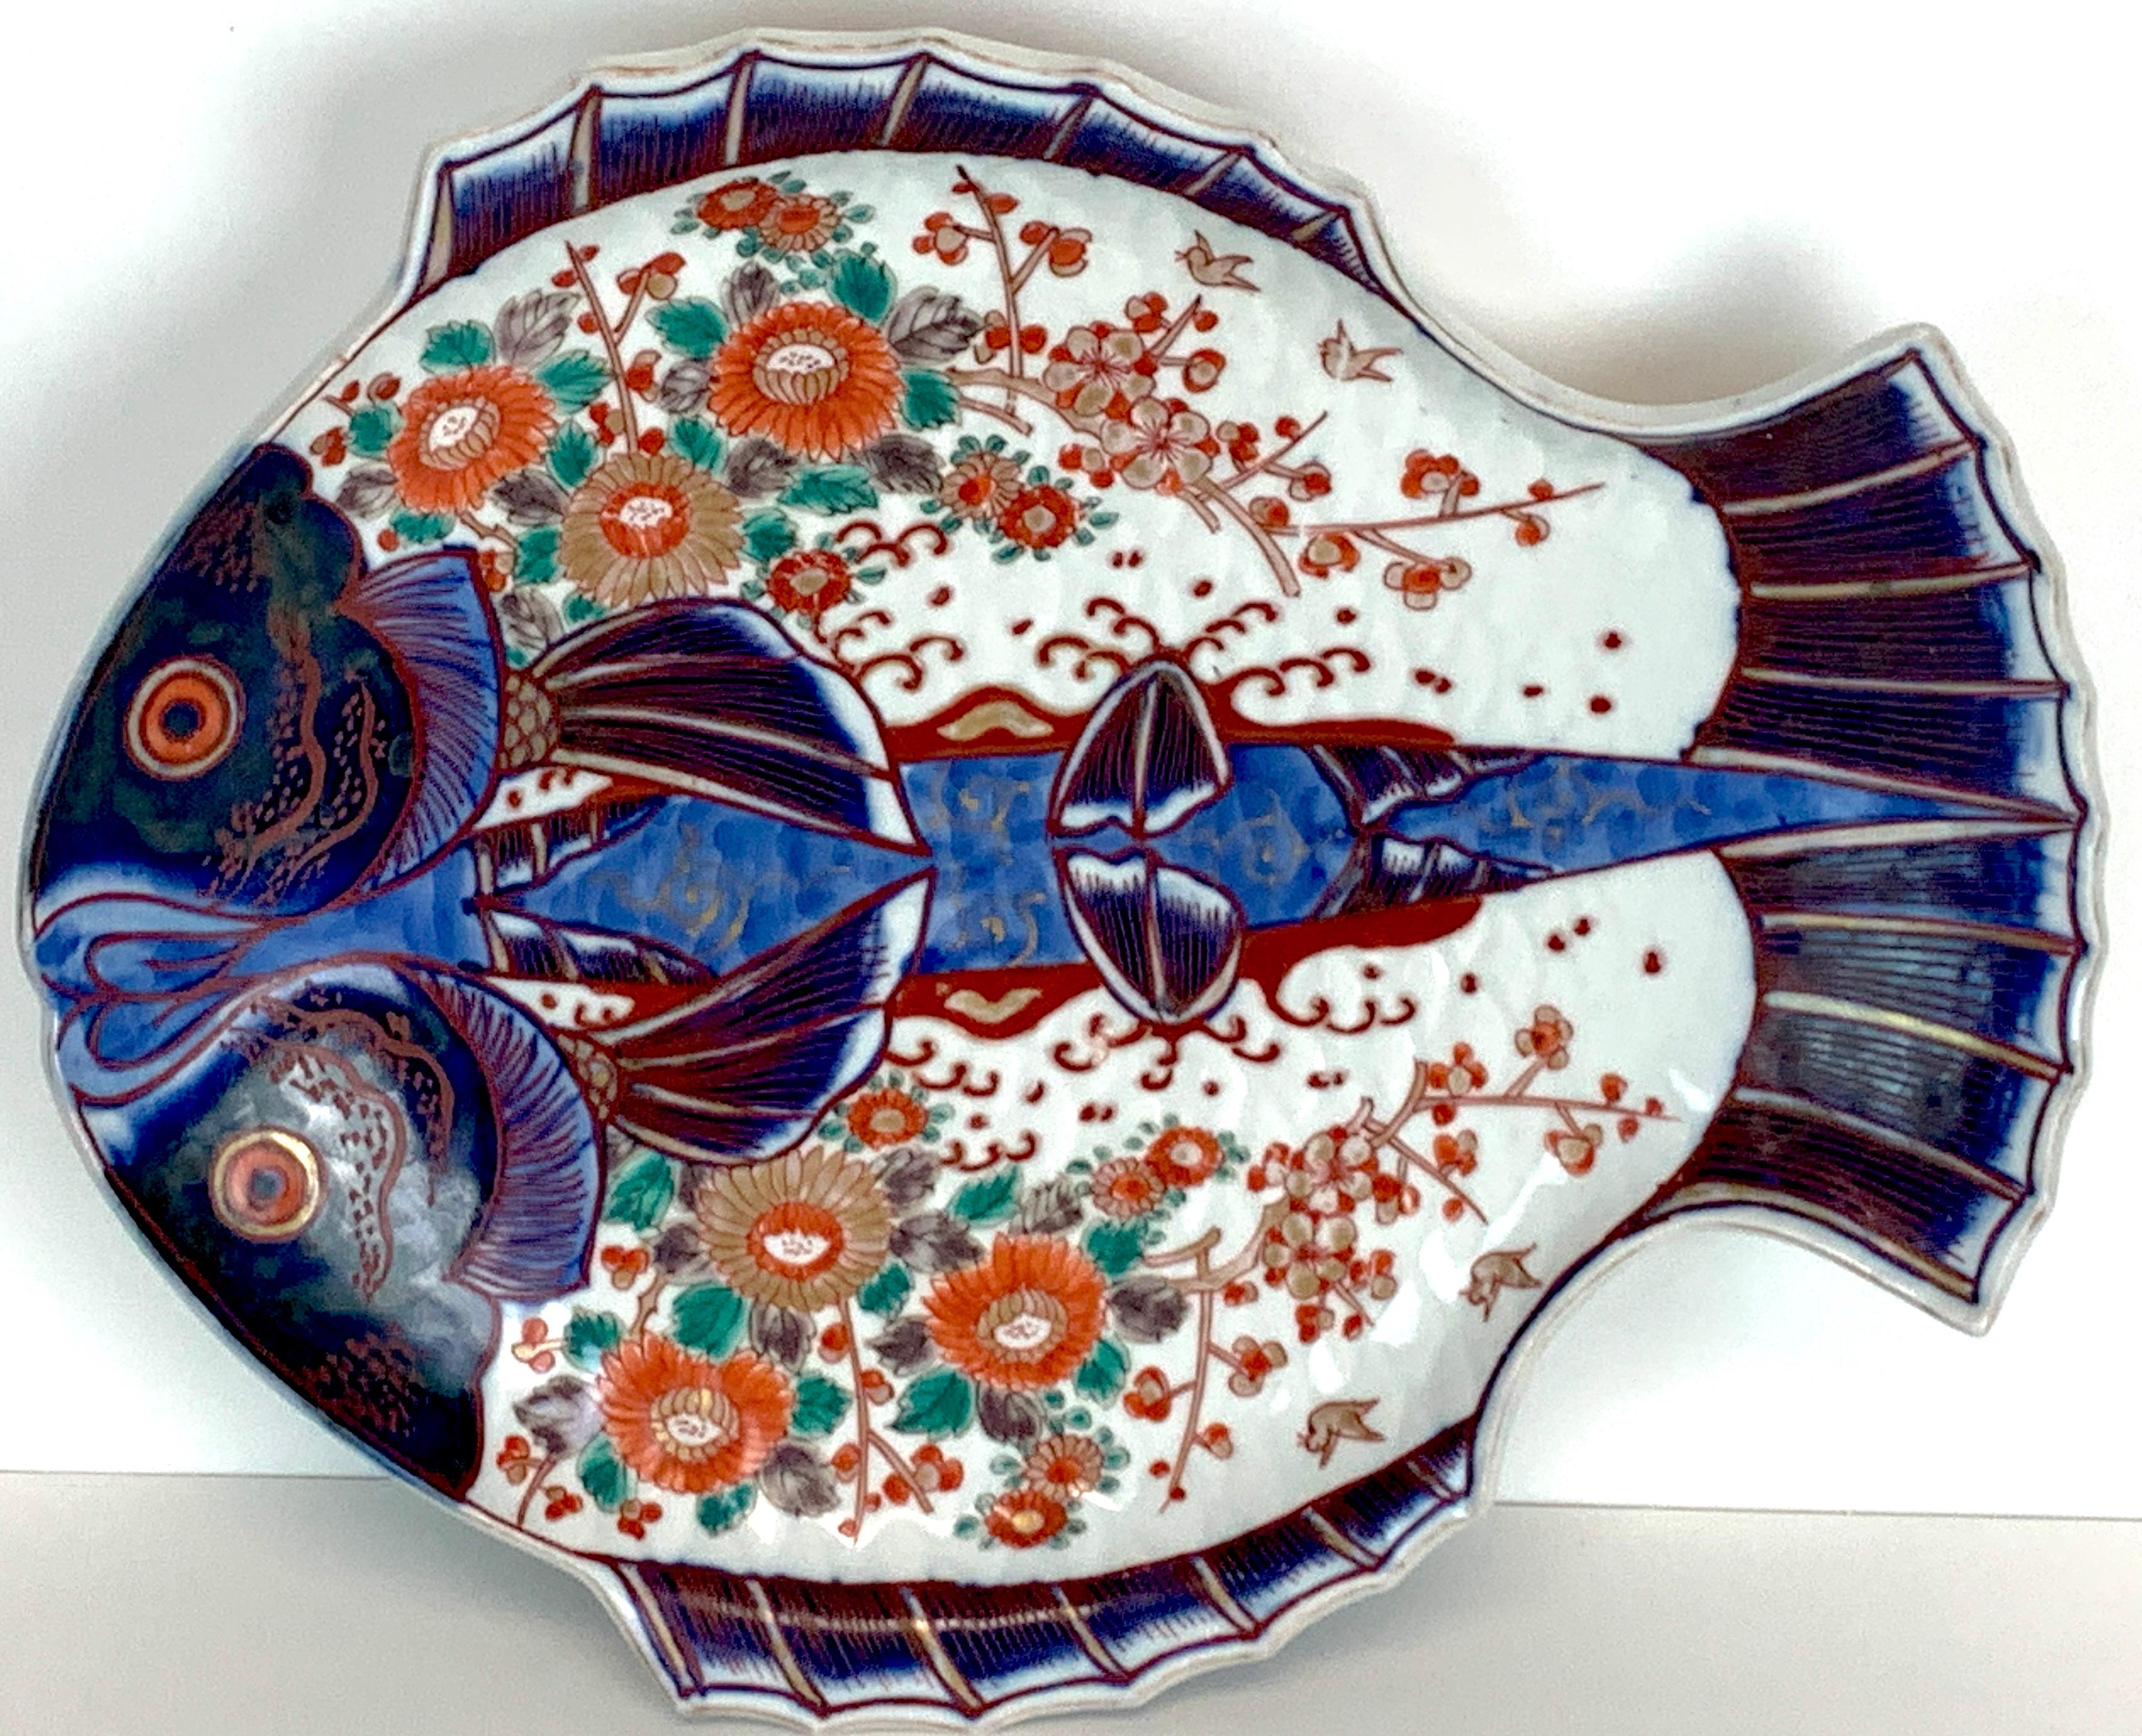 Meiji Imari fish plate, by Fukagawa V
A fine example, well decorated, good size, marked, circa 1890
This examples measures 11.5-inches wide x 9.75-inches high.
Part of a collection of eight fine Imari examples, the V is for internal inventory